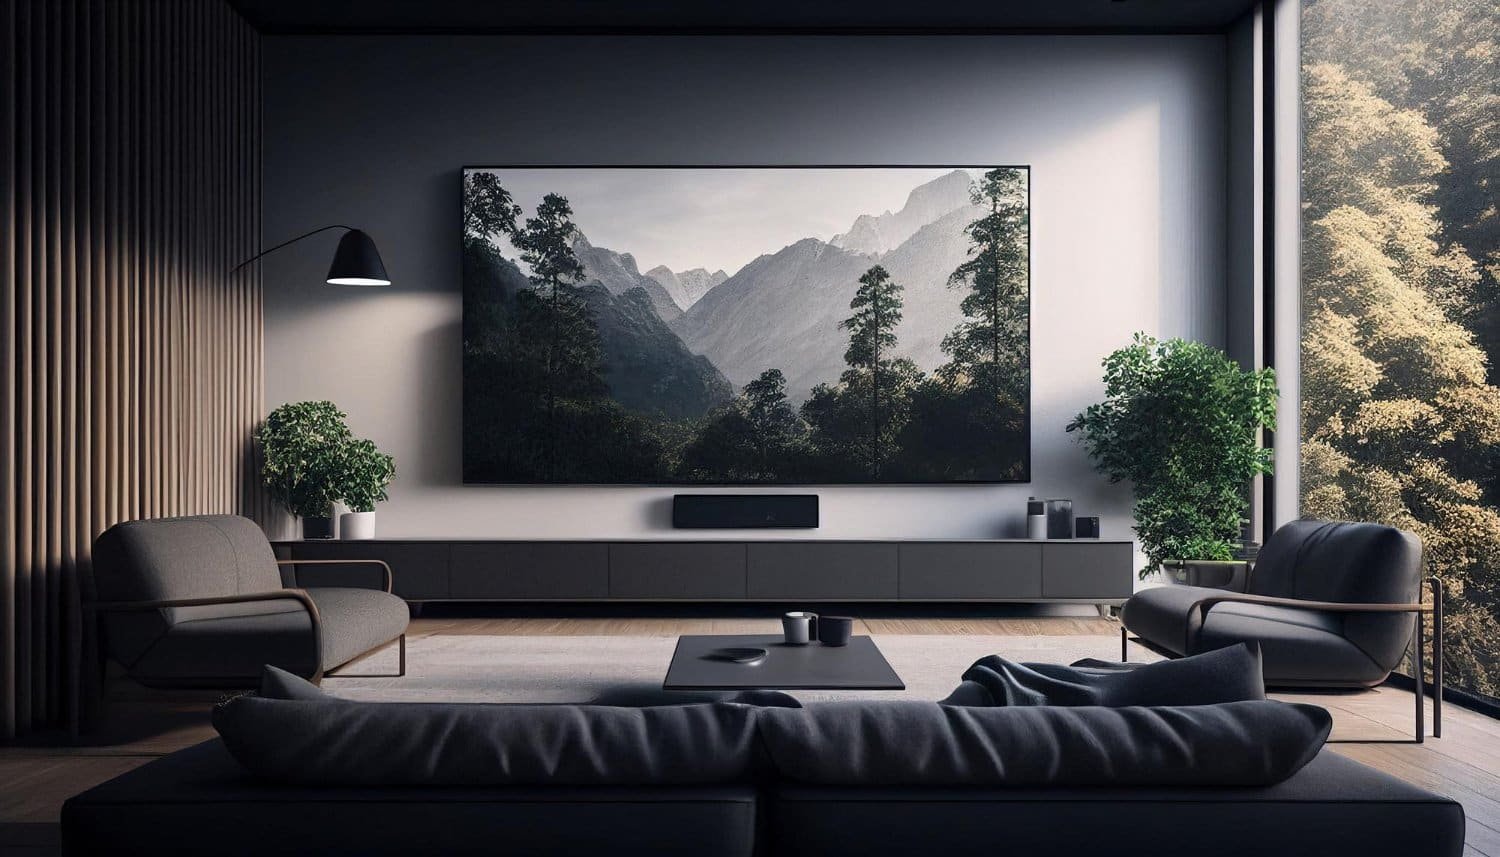 Choosing the Right Smart TV for Your Living Room